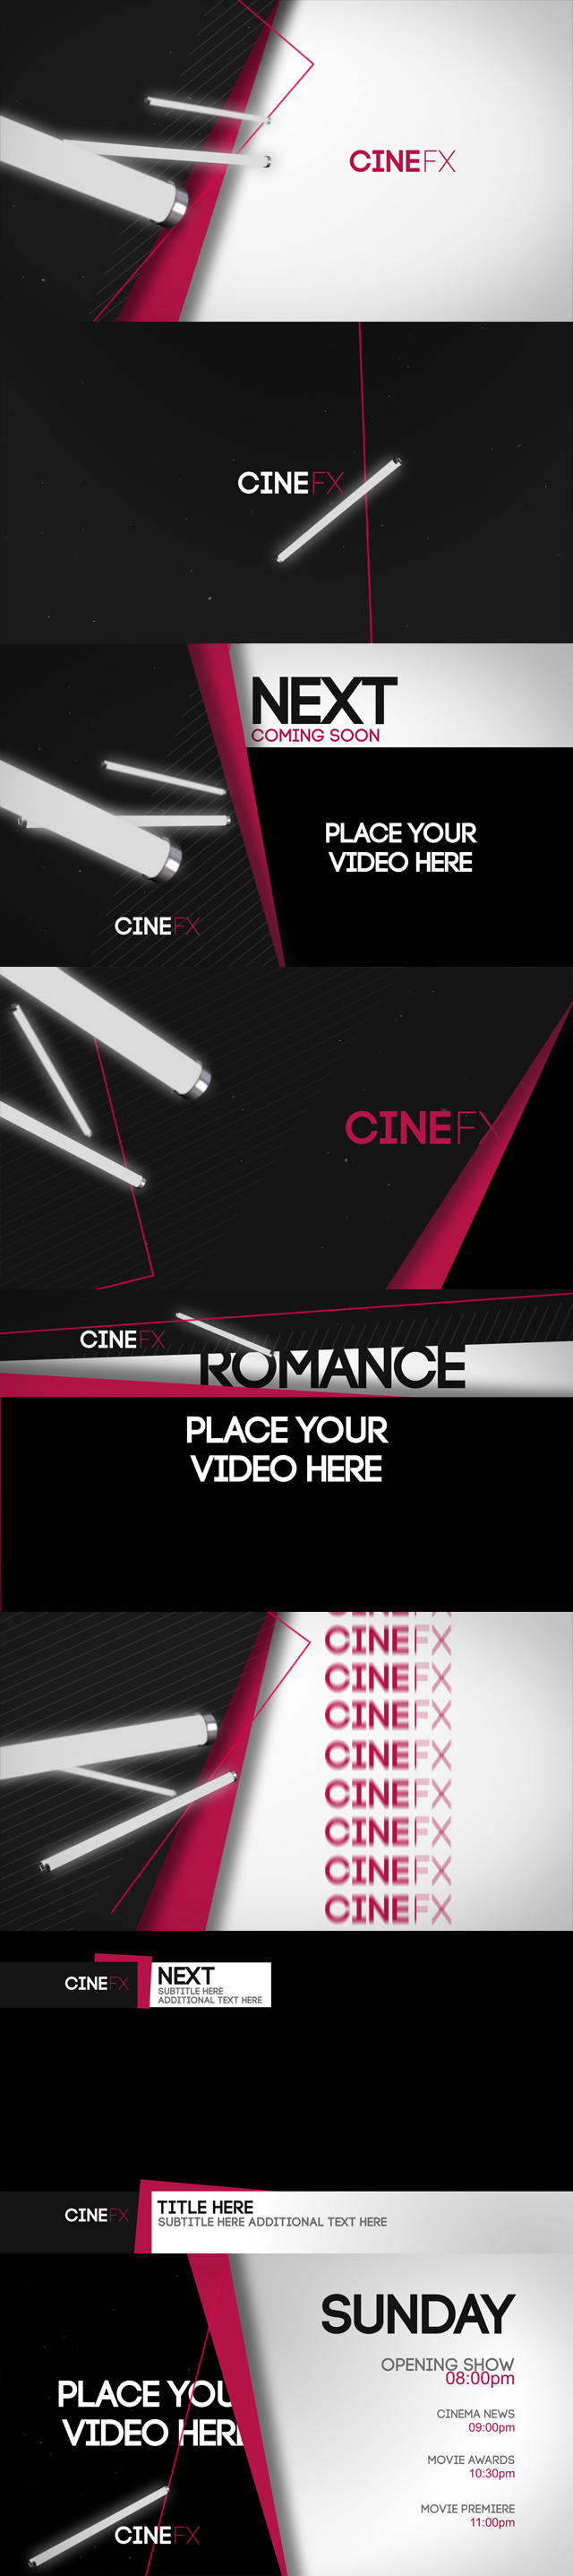  Cine FX Broadcast Channel Package 